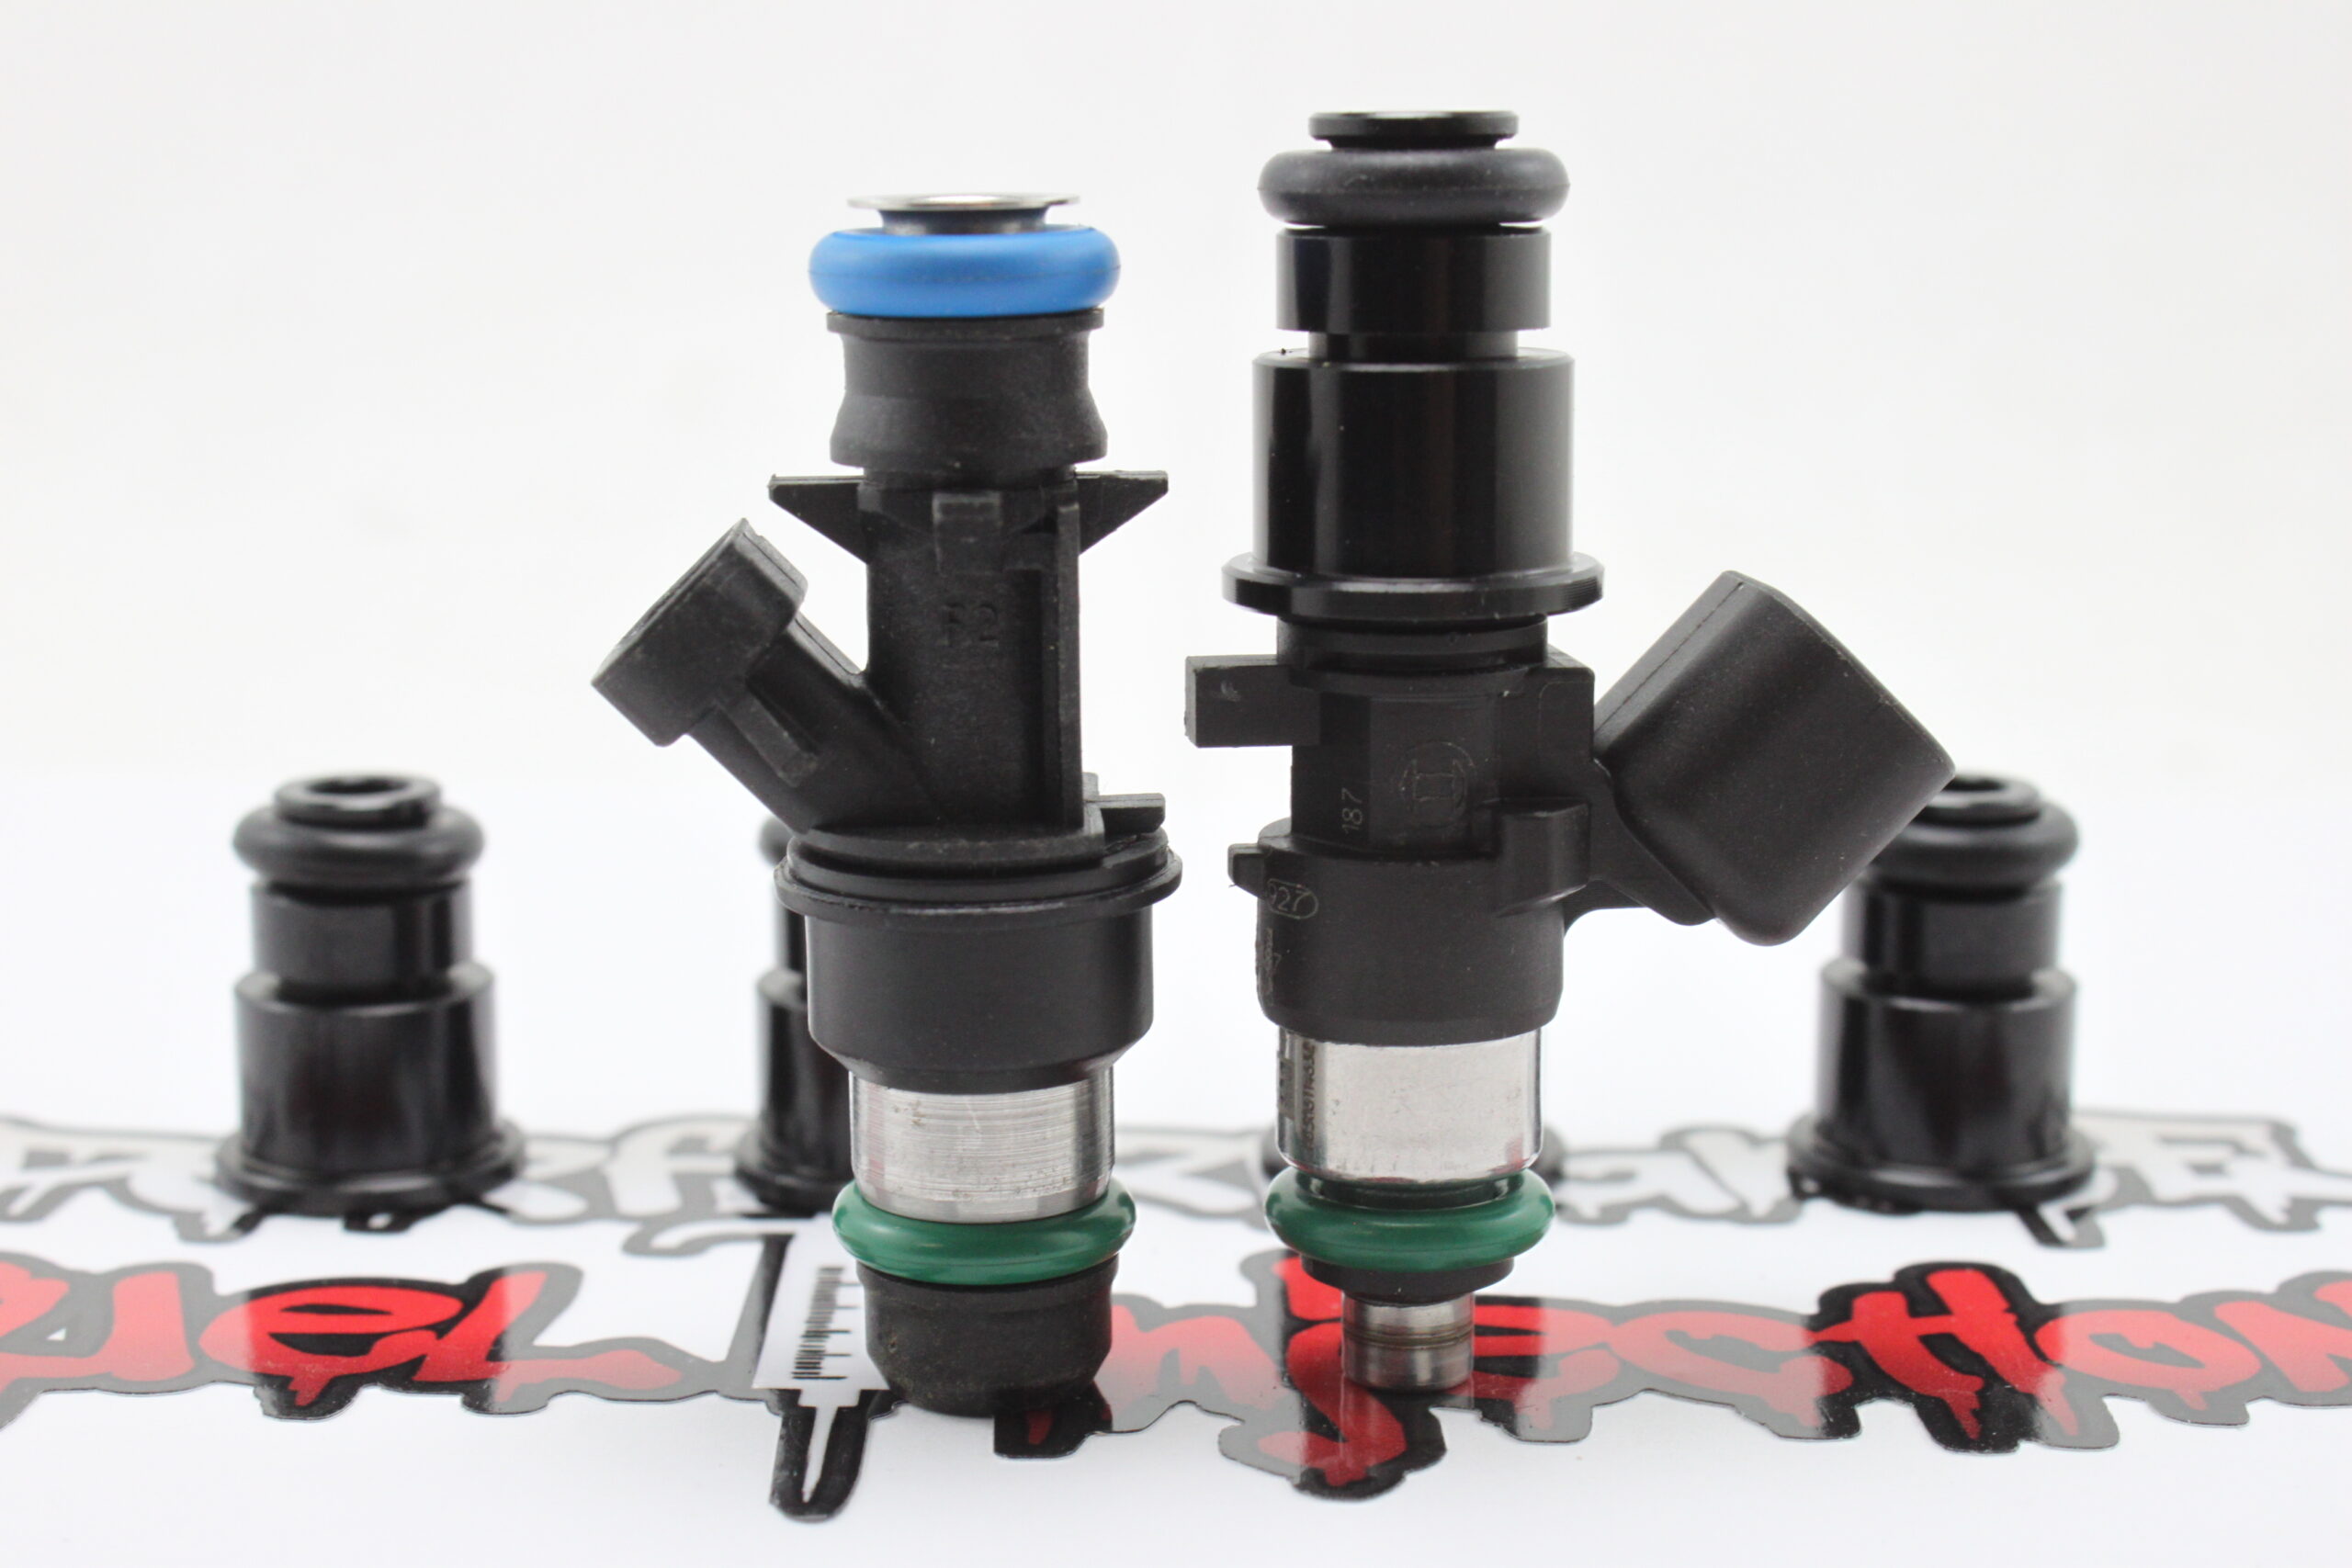 Injector height adapters (4) : 14mm O ring - Adds 1/2